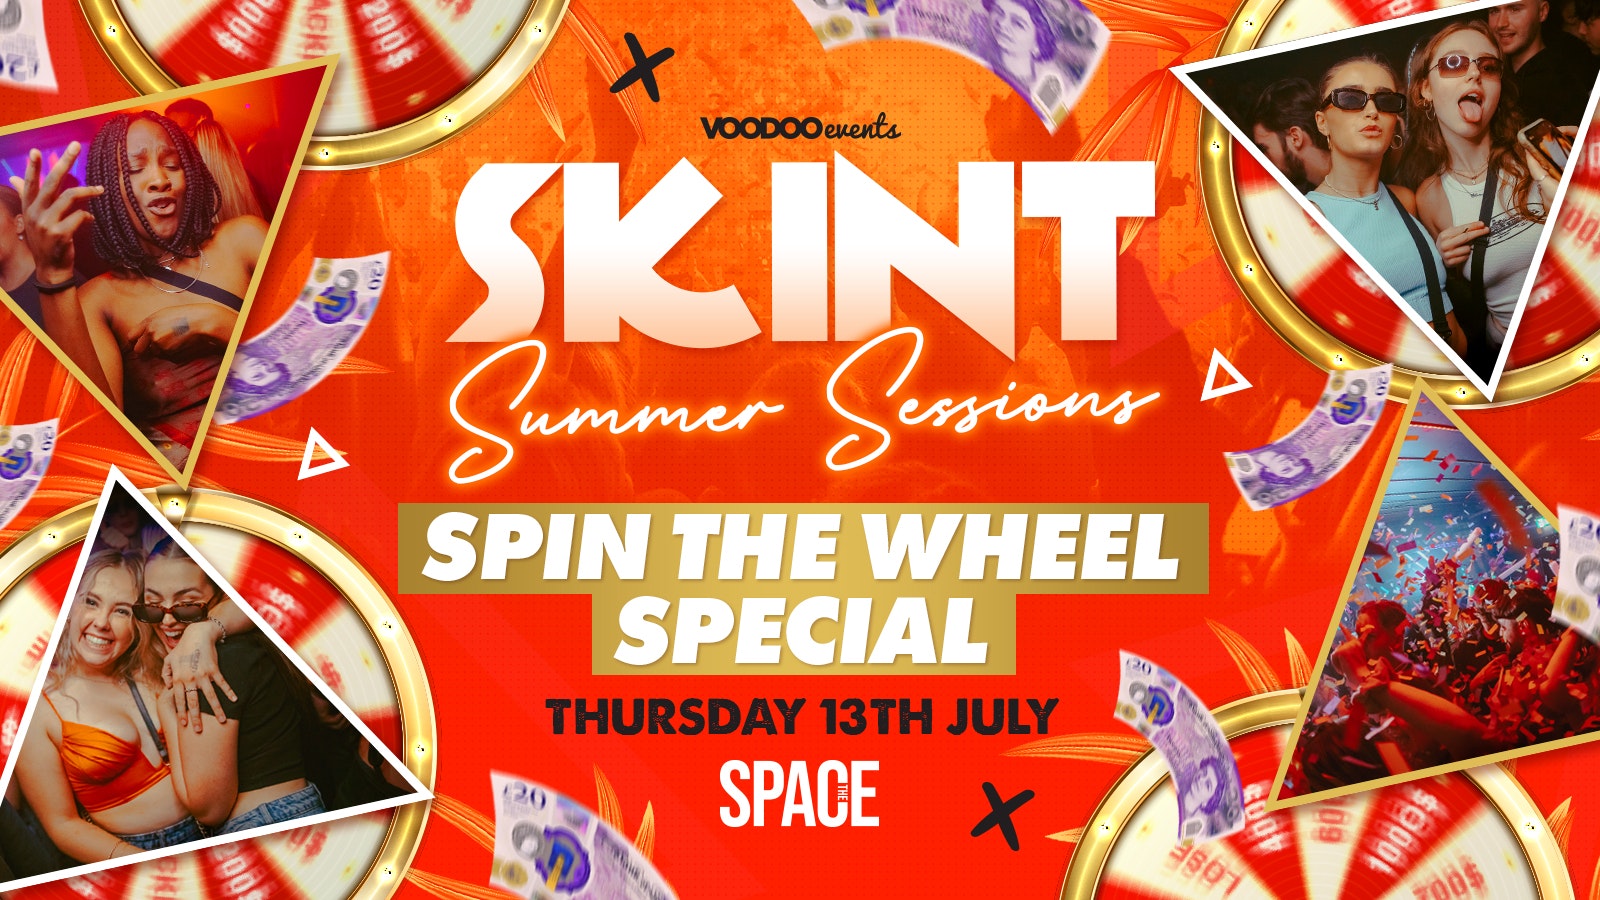 Skint Thursdays at Space Summer Sessions – 13th July – Spin The Wheel Special